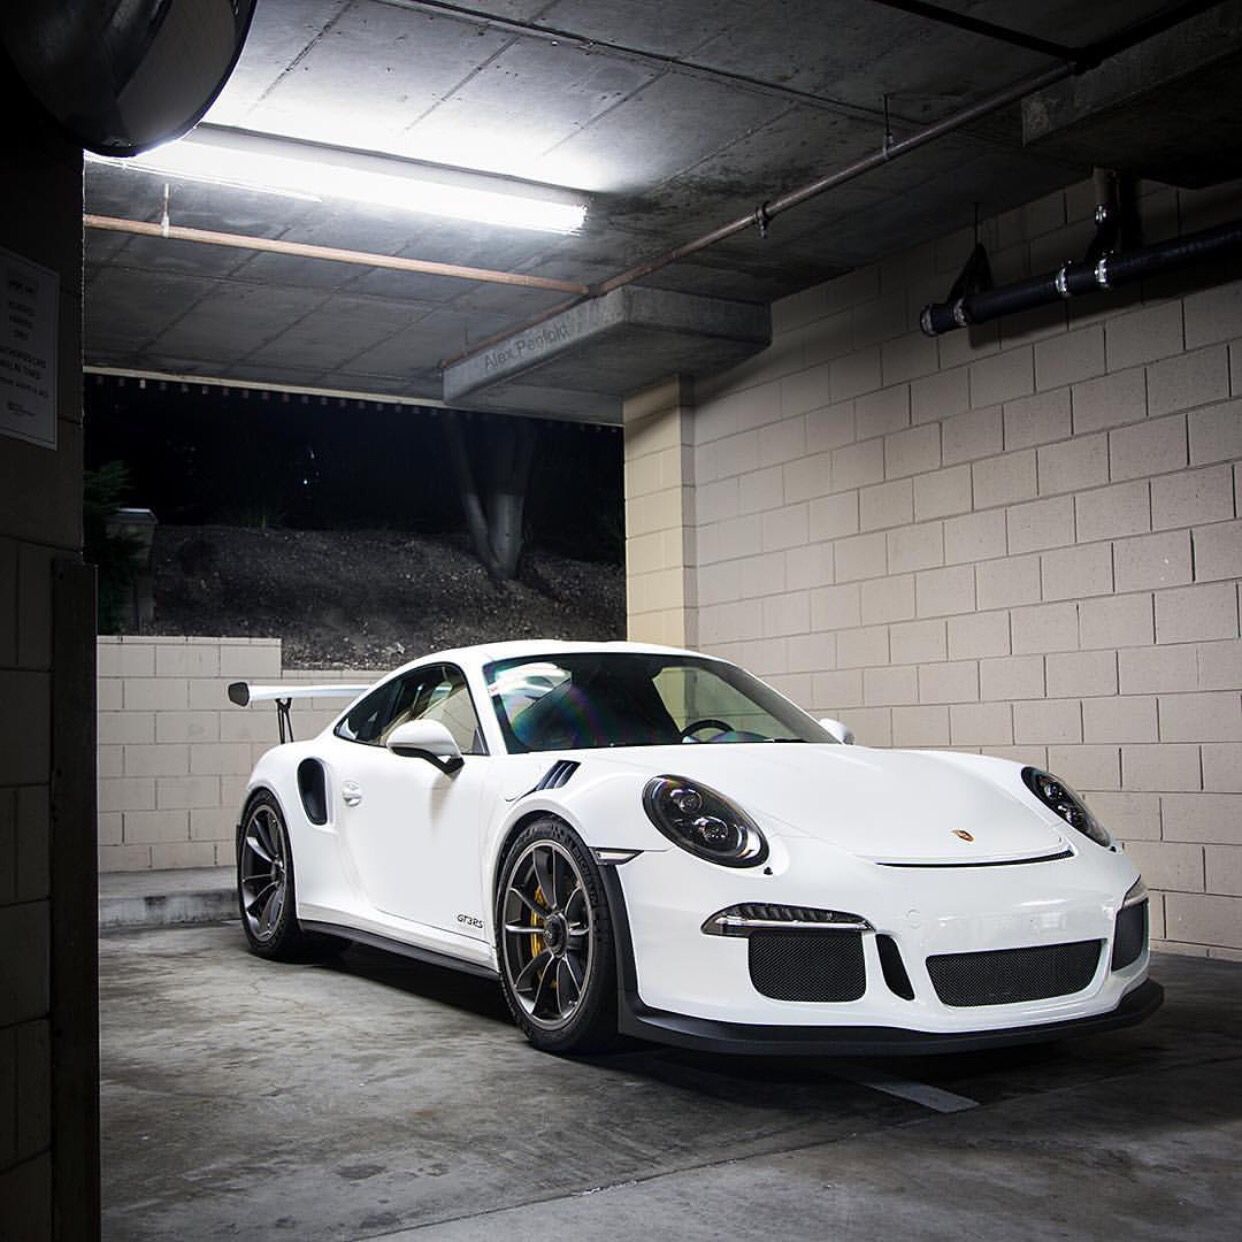 Porsche 991 GT3 RS painted in White Photo taken by: alex penfold on Instagram